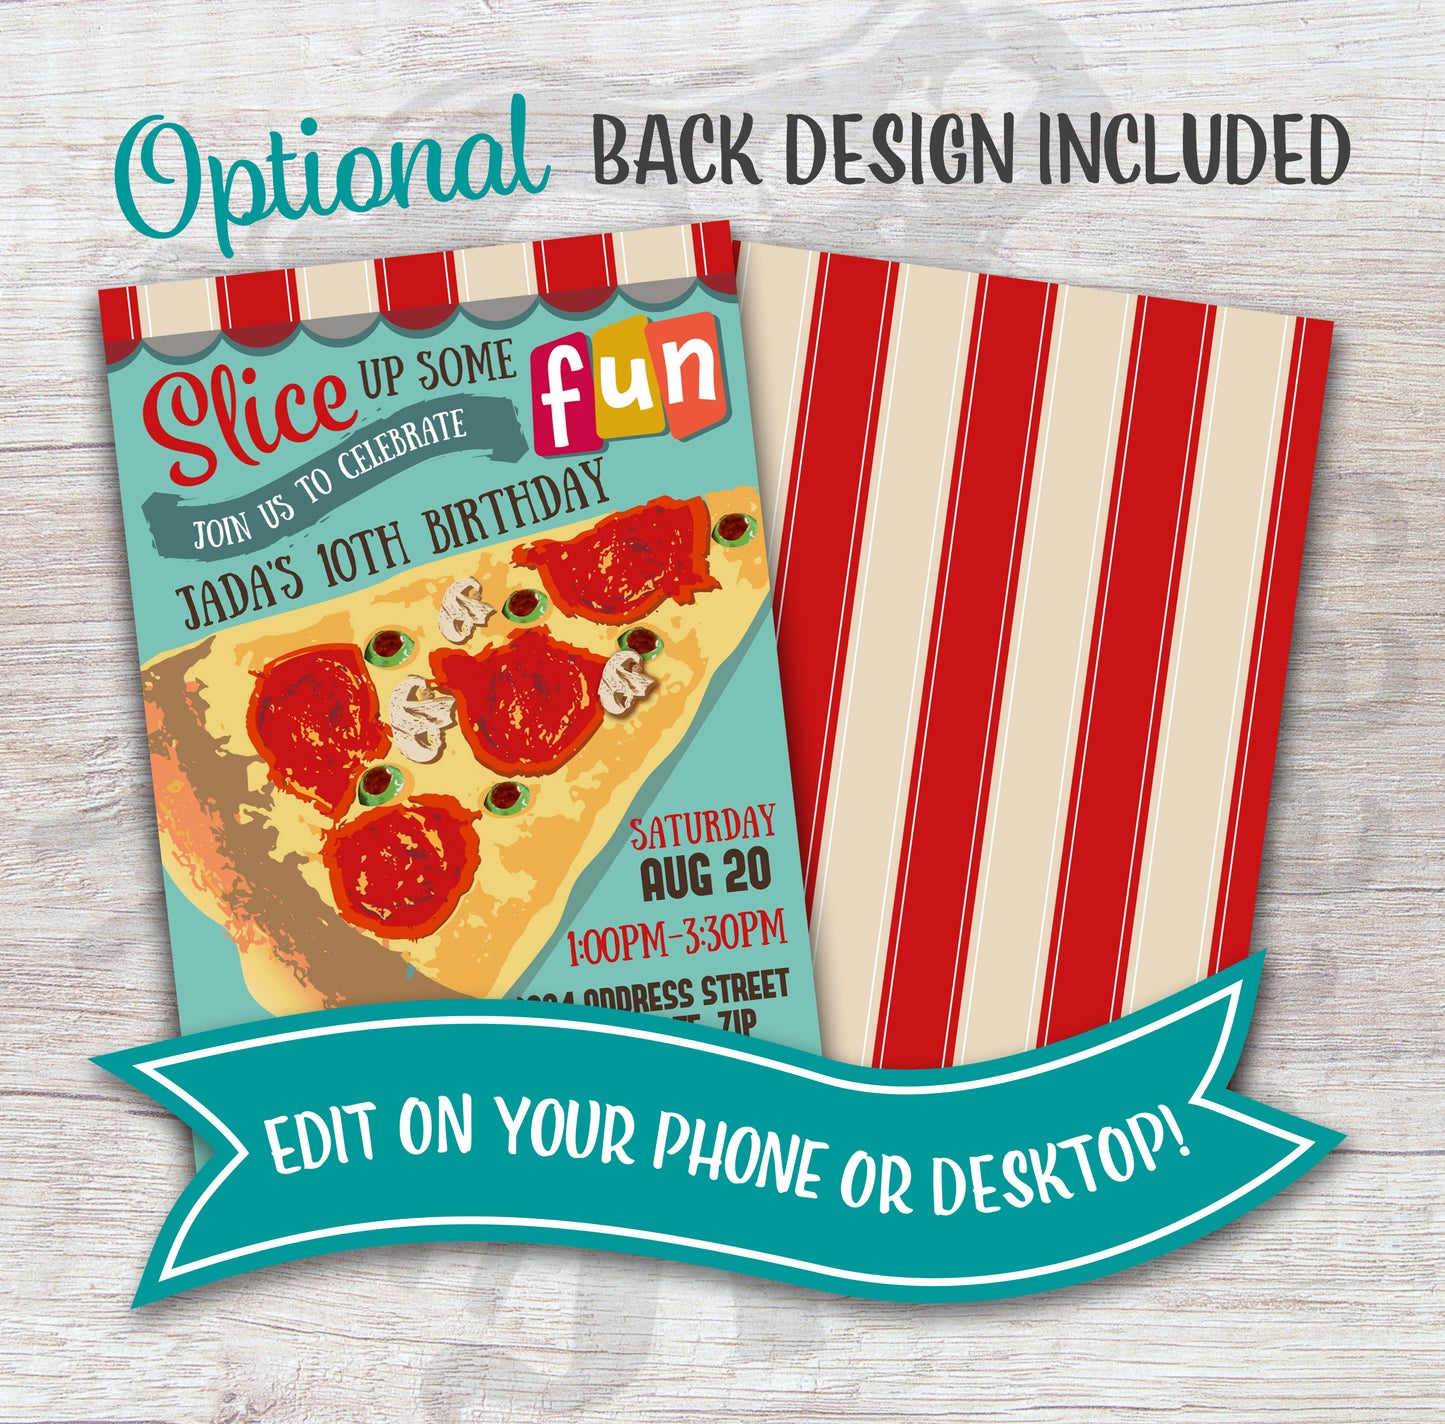 Vintage pizza party birthday invite with back design